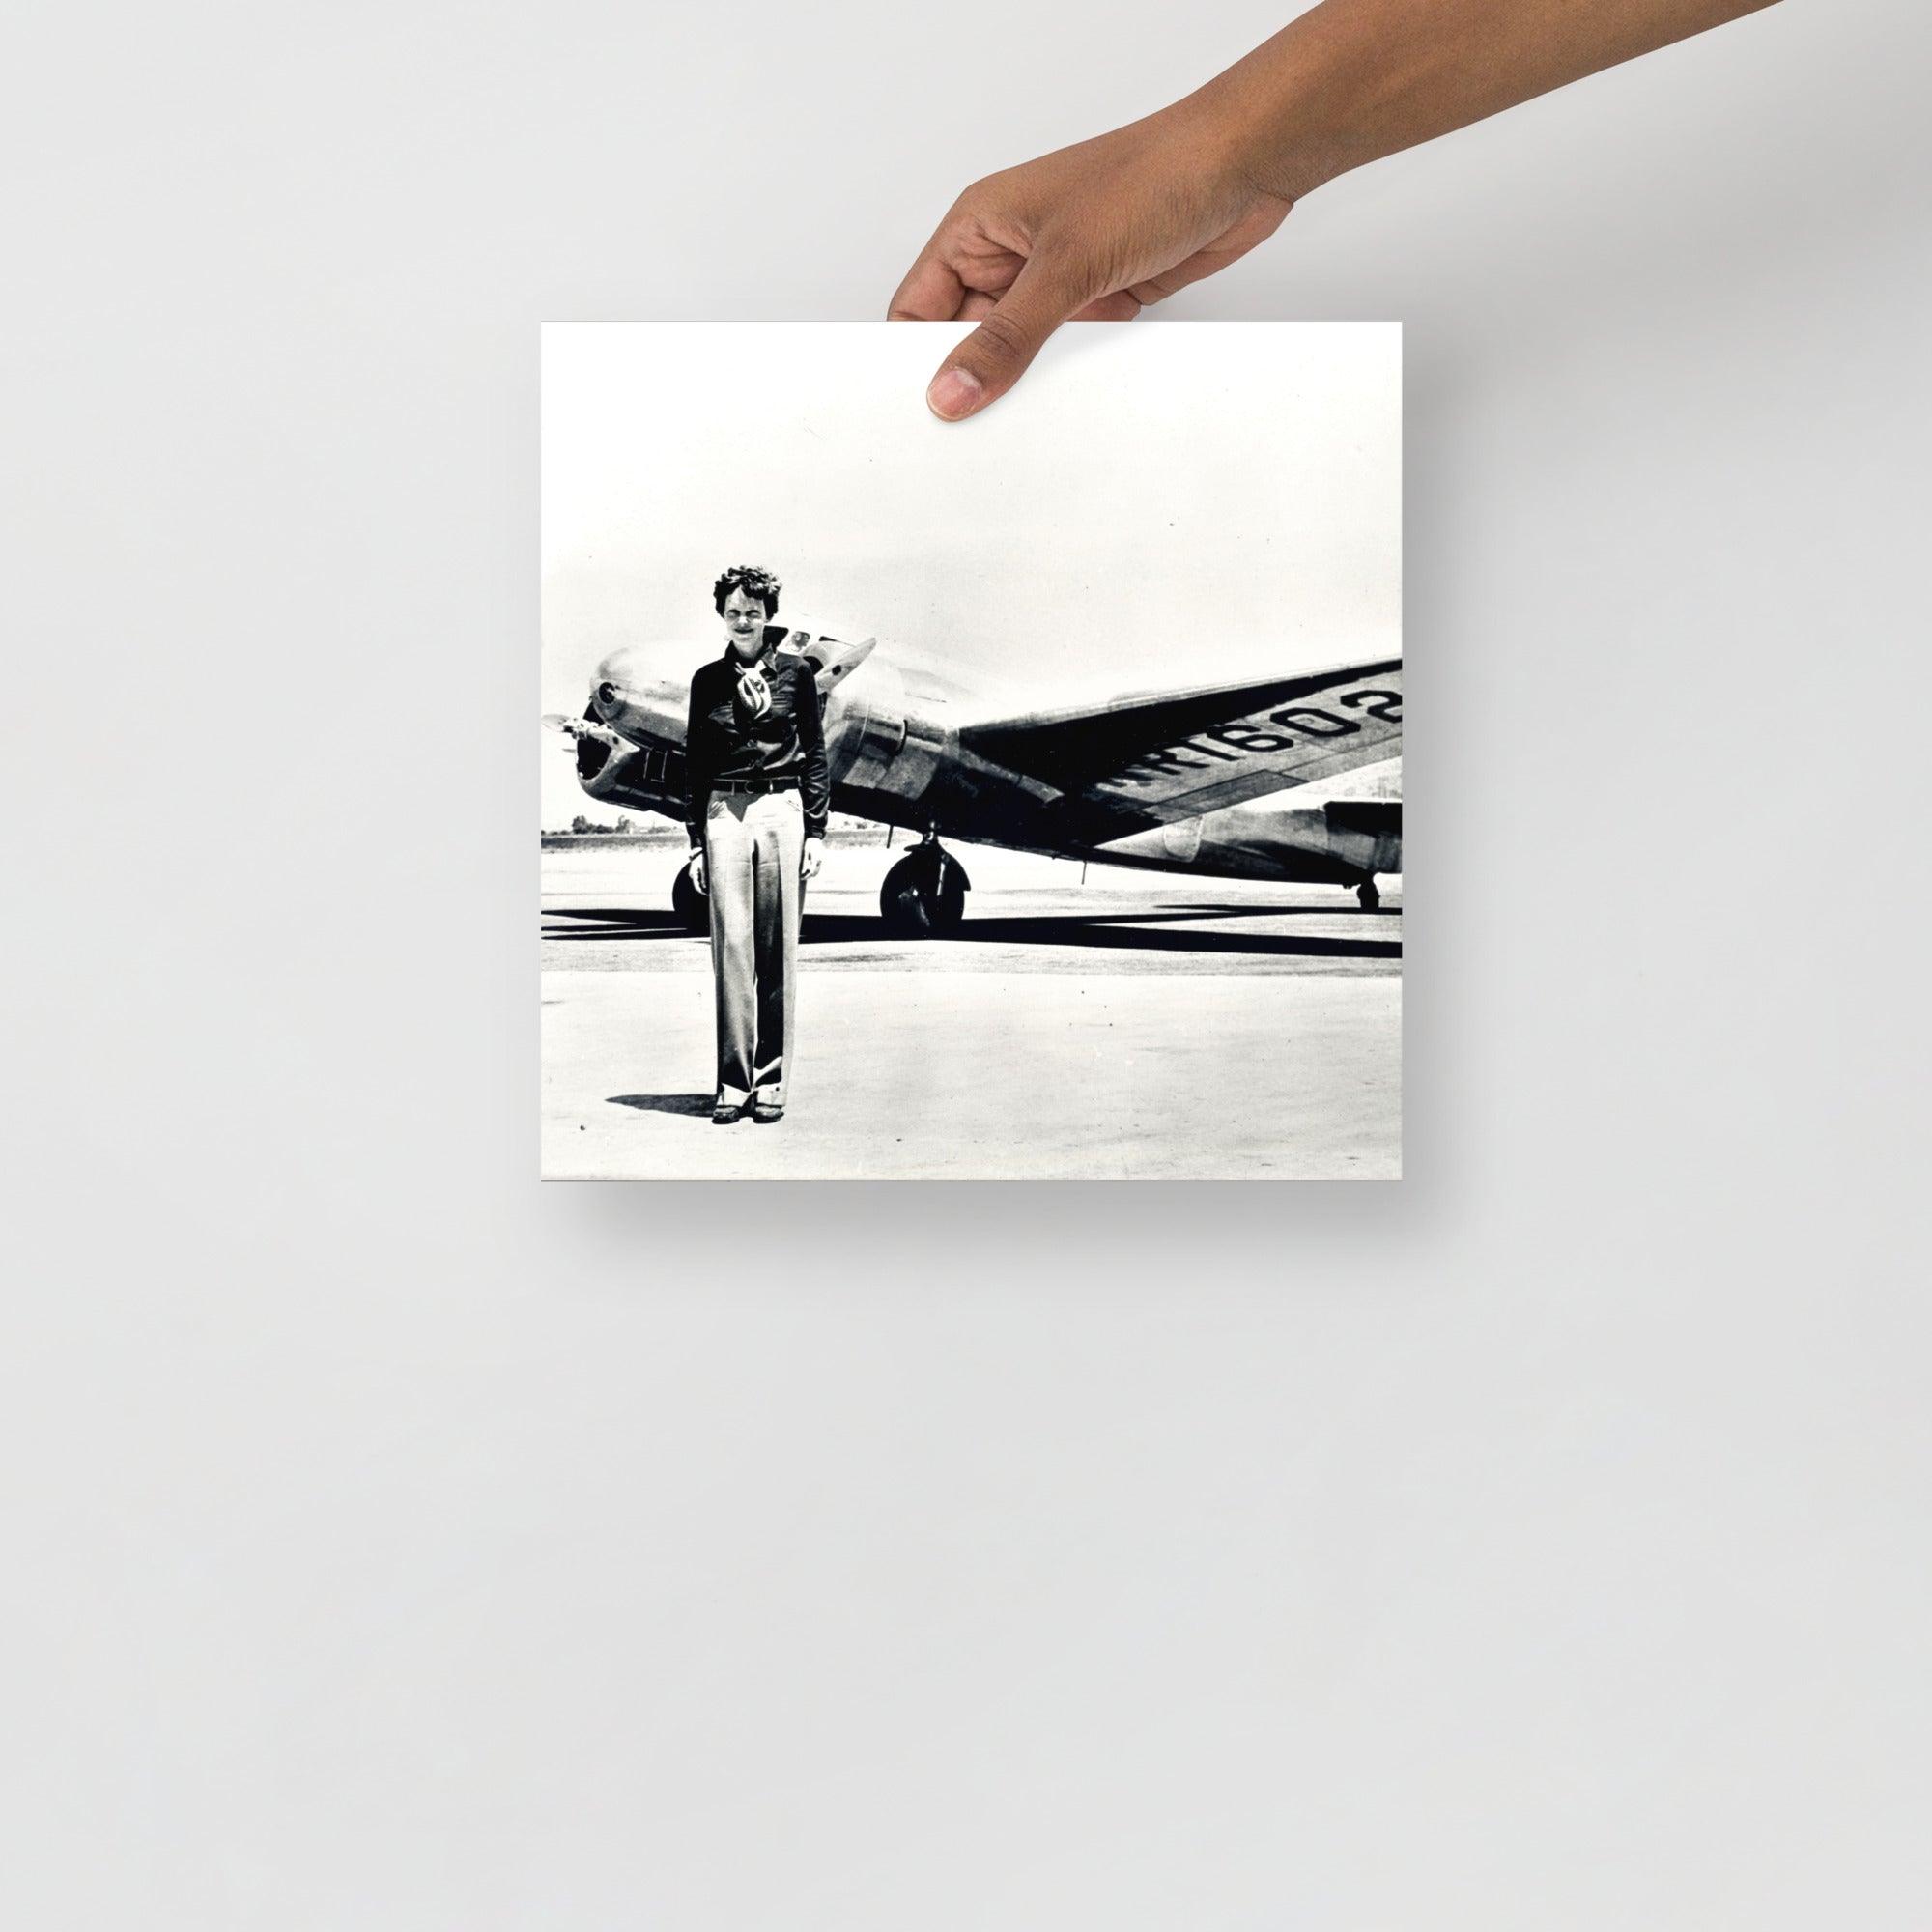 An Amelia Earhart standing in front of the Lockheed Electra on a plain backdrop in size 12x12”.